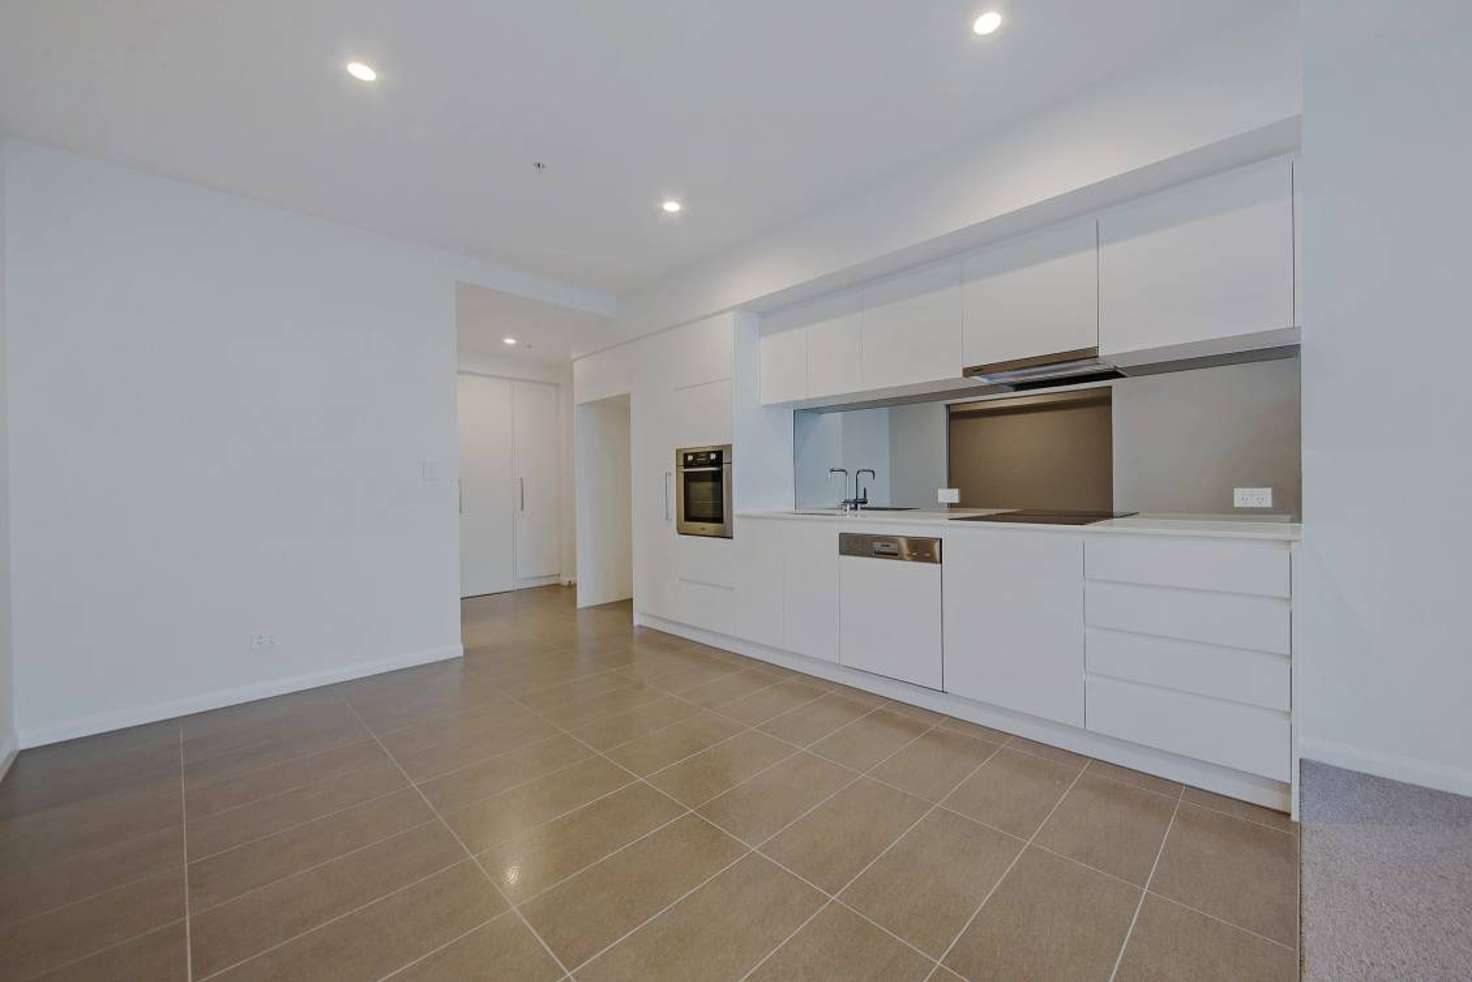 Main view of Homely apartment listing, 11006/300 Old Cleveland Rd, Coorparoo QLD 4151